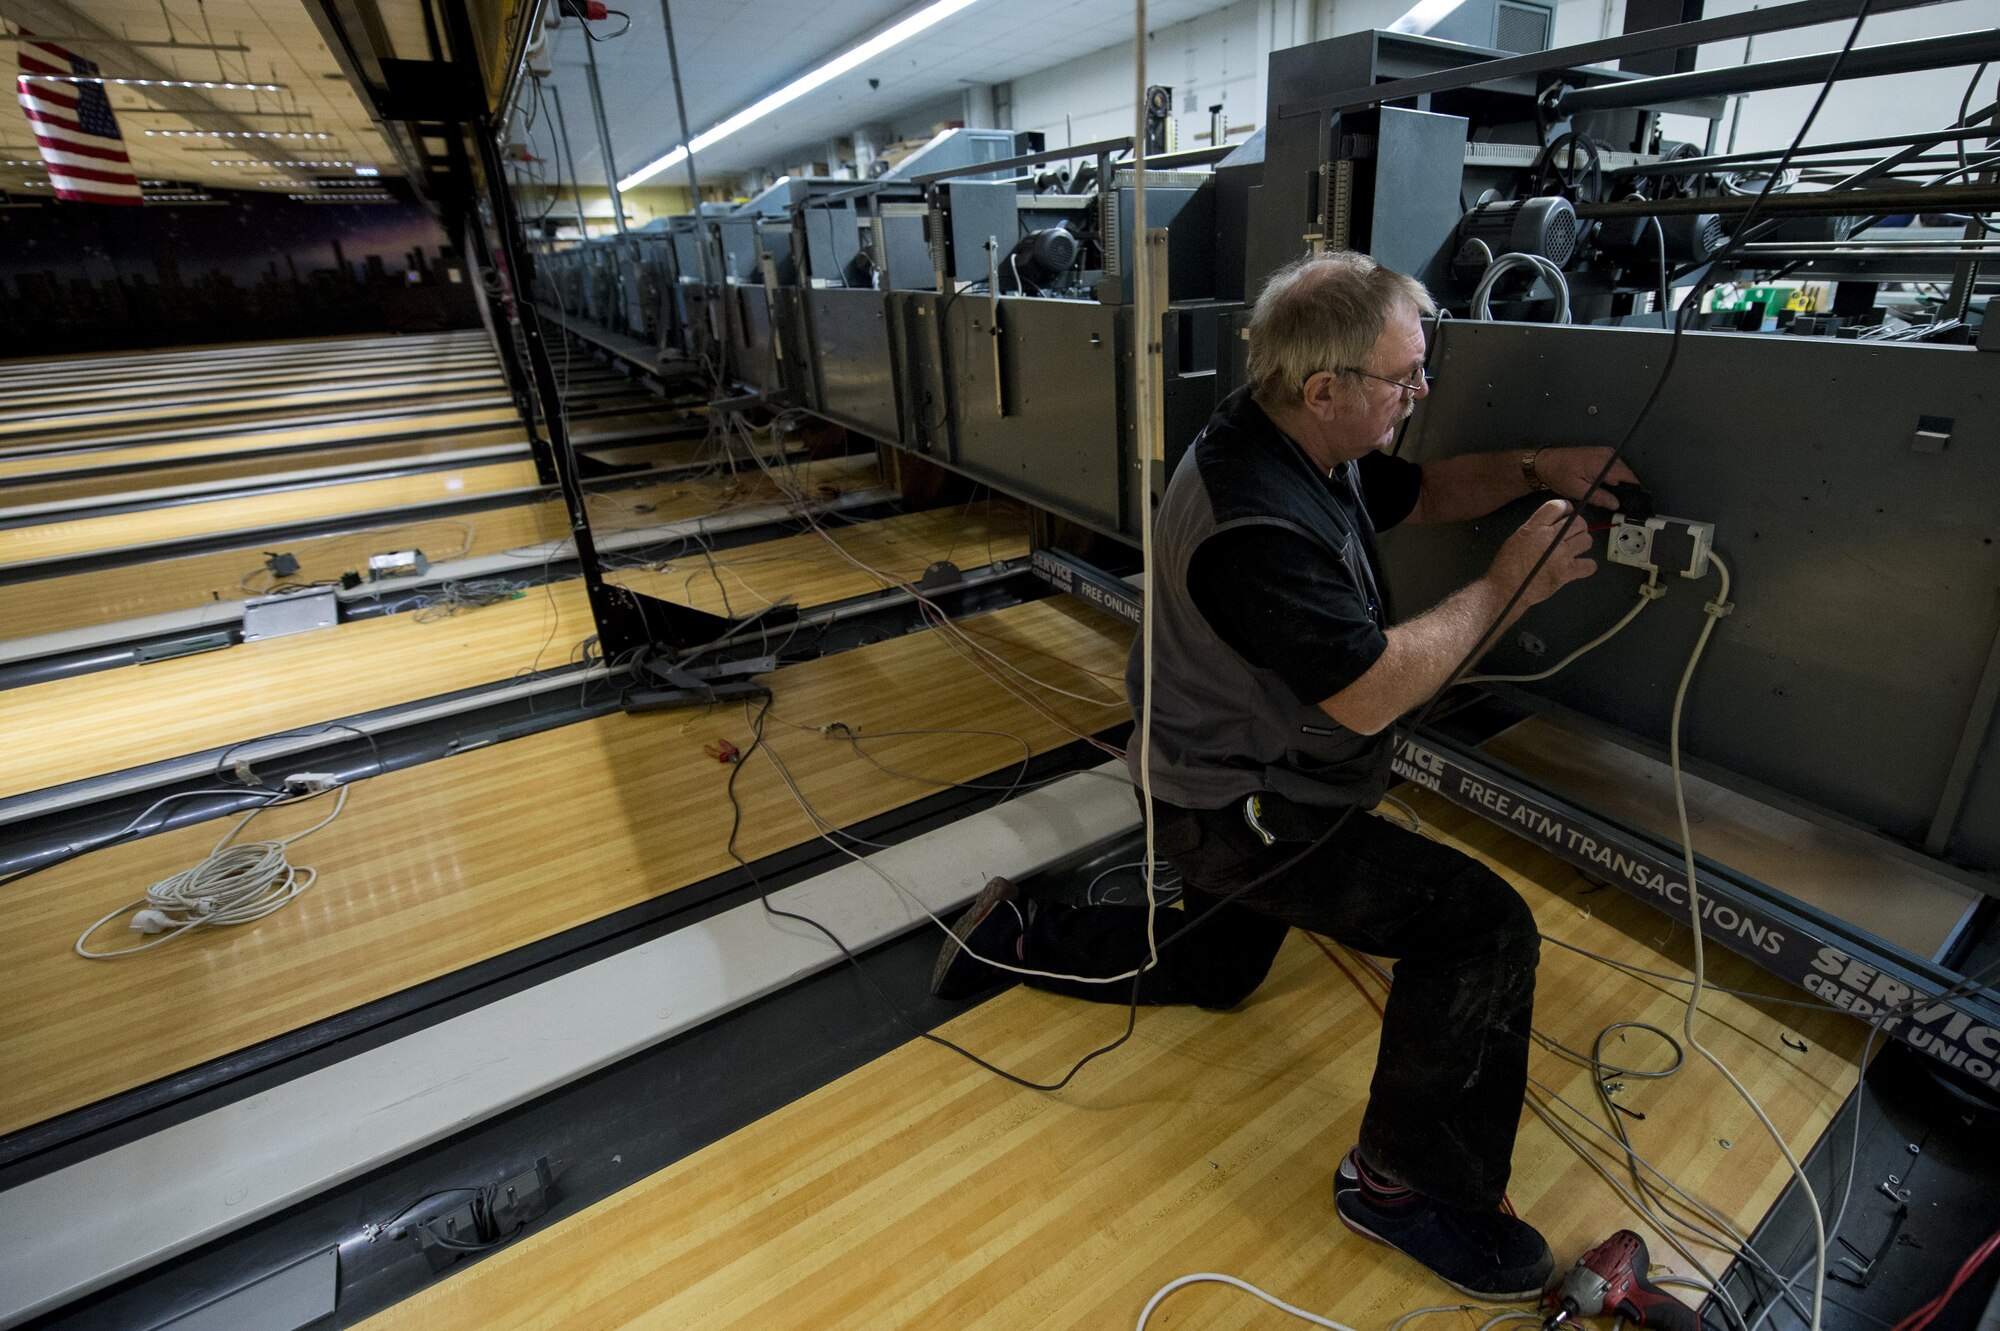 Dave Hardy, a contract worker, disassembles a pin-setter during a renovation at Eifel Lanes bowling center on Spangdahlem Air Base, Germany, Oct. 25, 2016. Renovations, like the bowling alley upgrade, are happening around the base in an effort to improve the quality of life for Airmen and their families. (U.S. Air Force Photo by Airman 1st Class Preston Cherry)